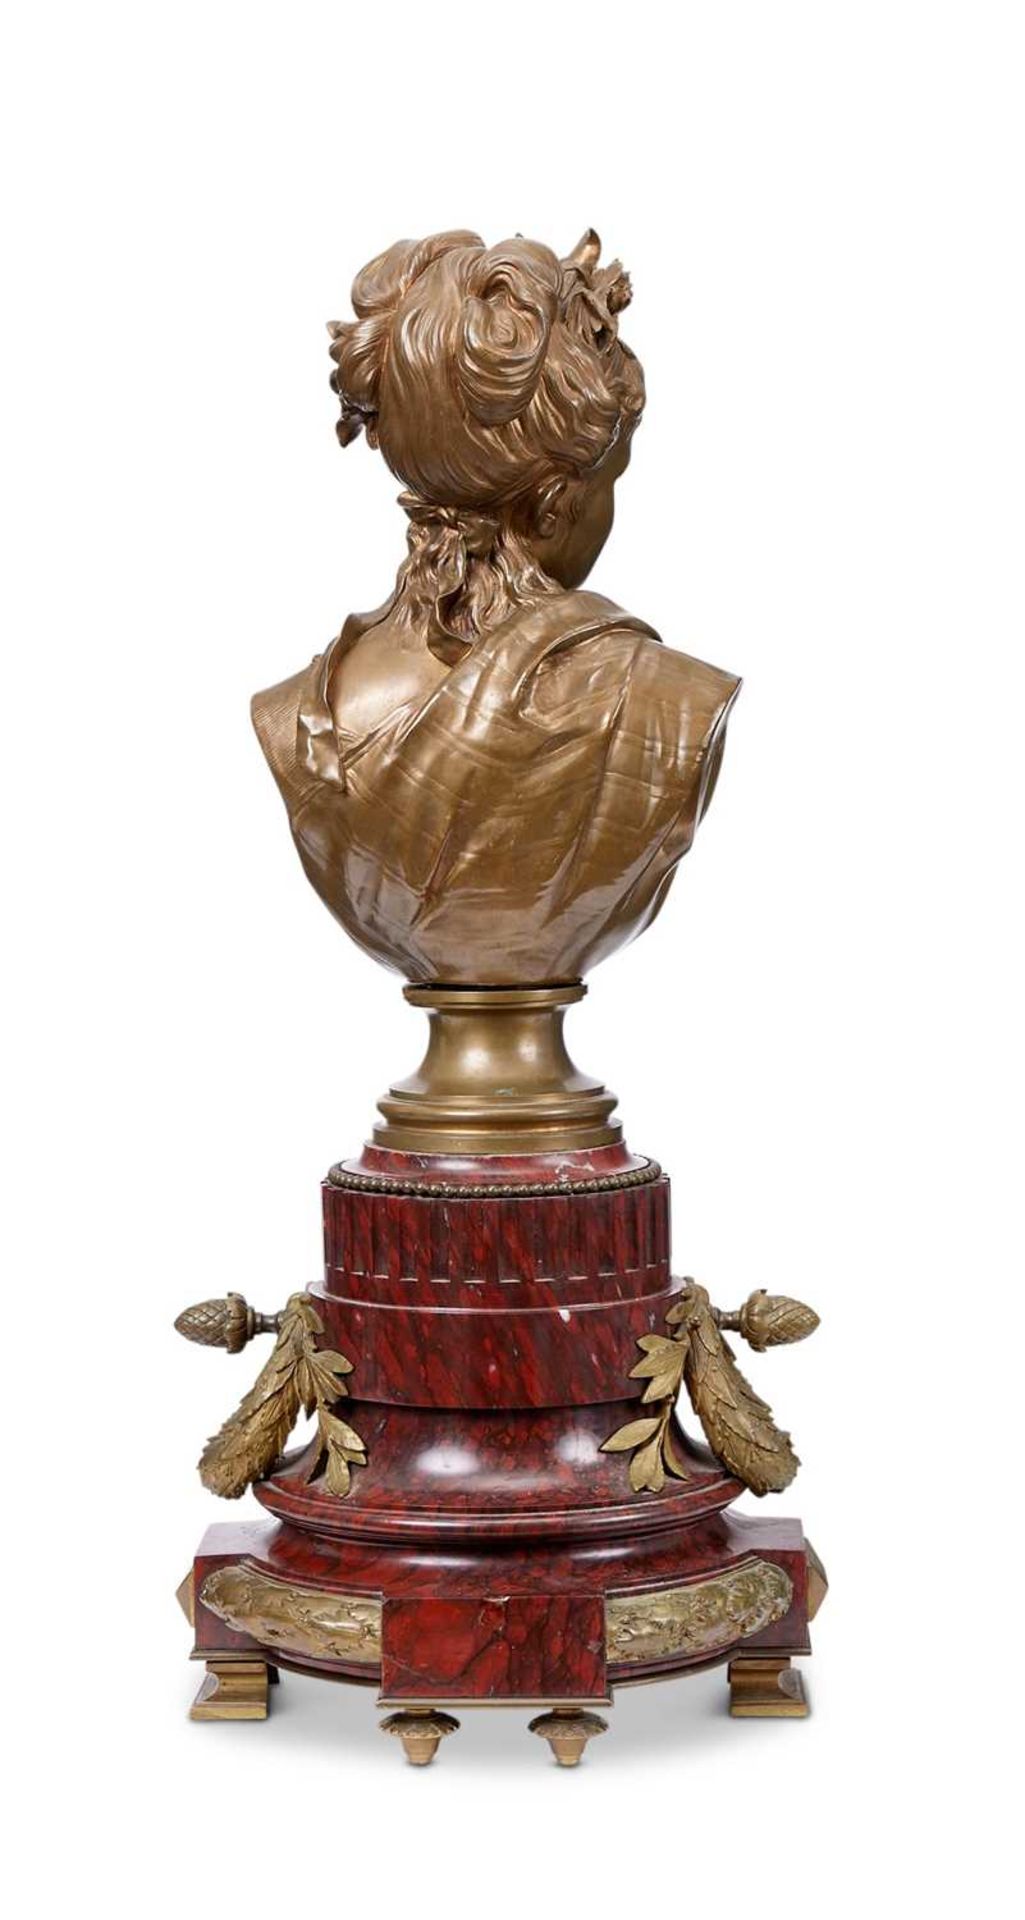 LEOPOLD HARZE (BELGIAN, 1831-1893): A LARGE BRONZE BUST OF A GIRL ON MARBLE BASE - Image 2 of 6